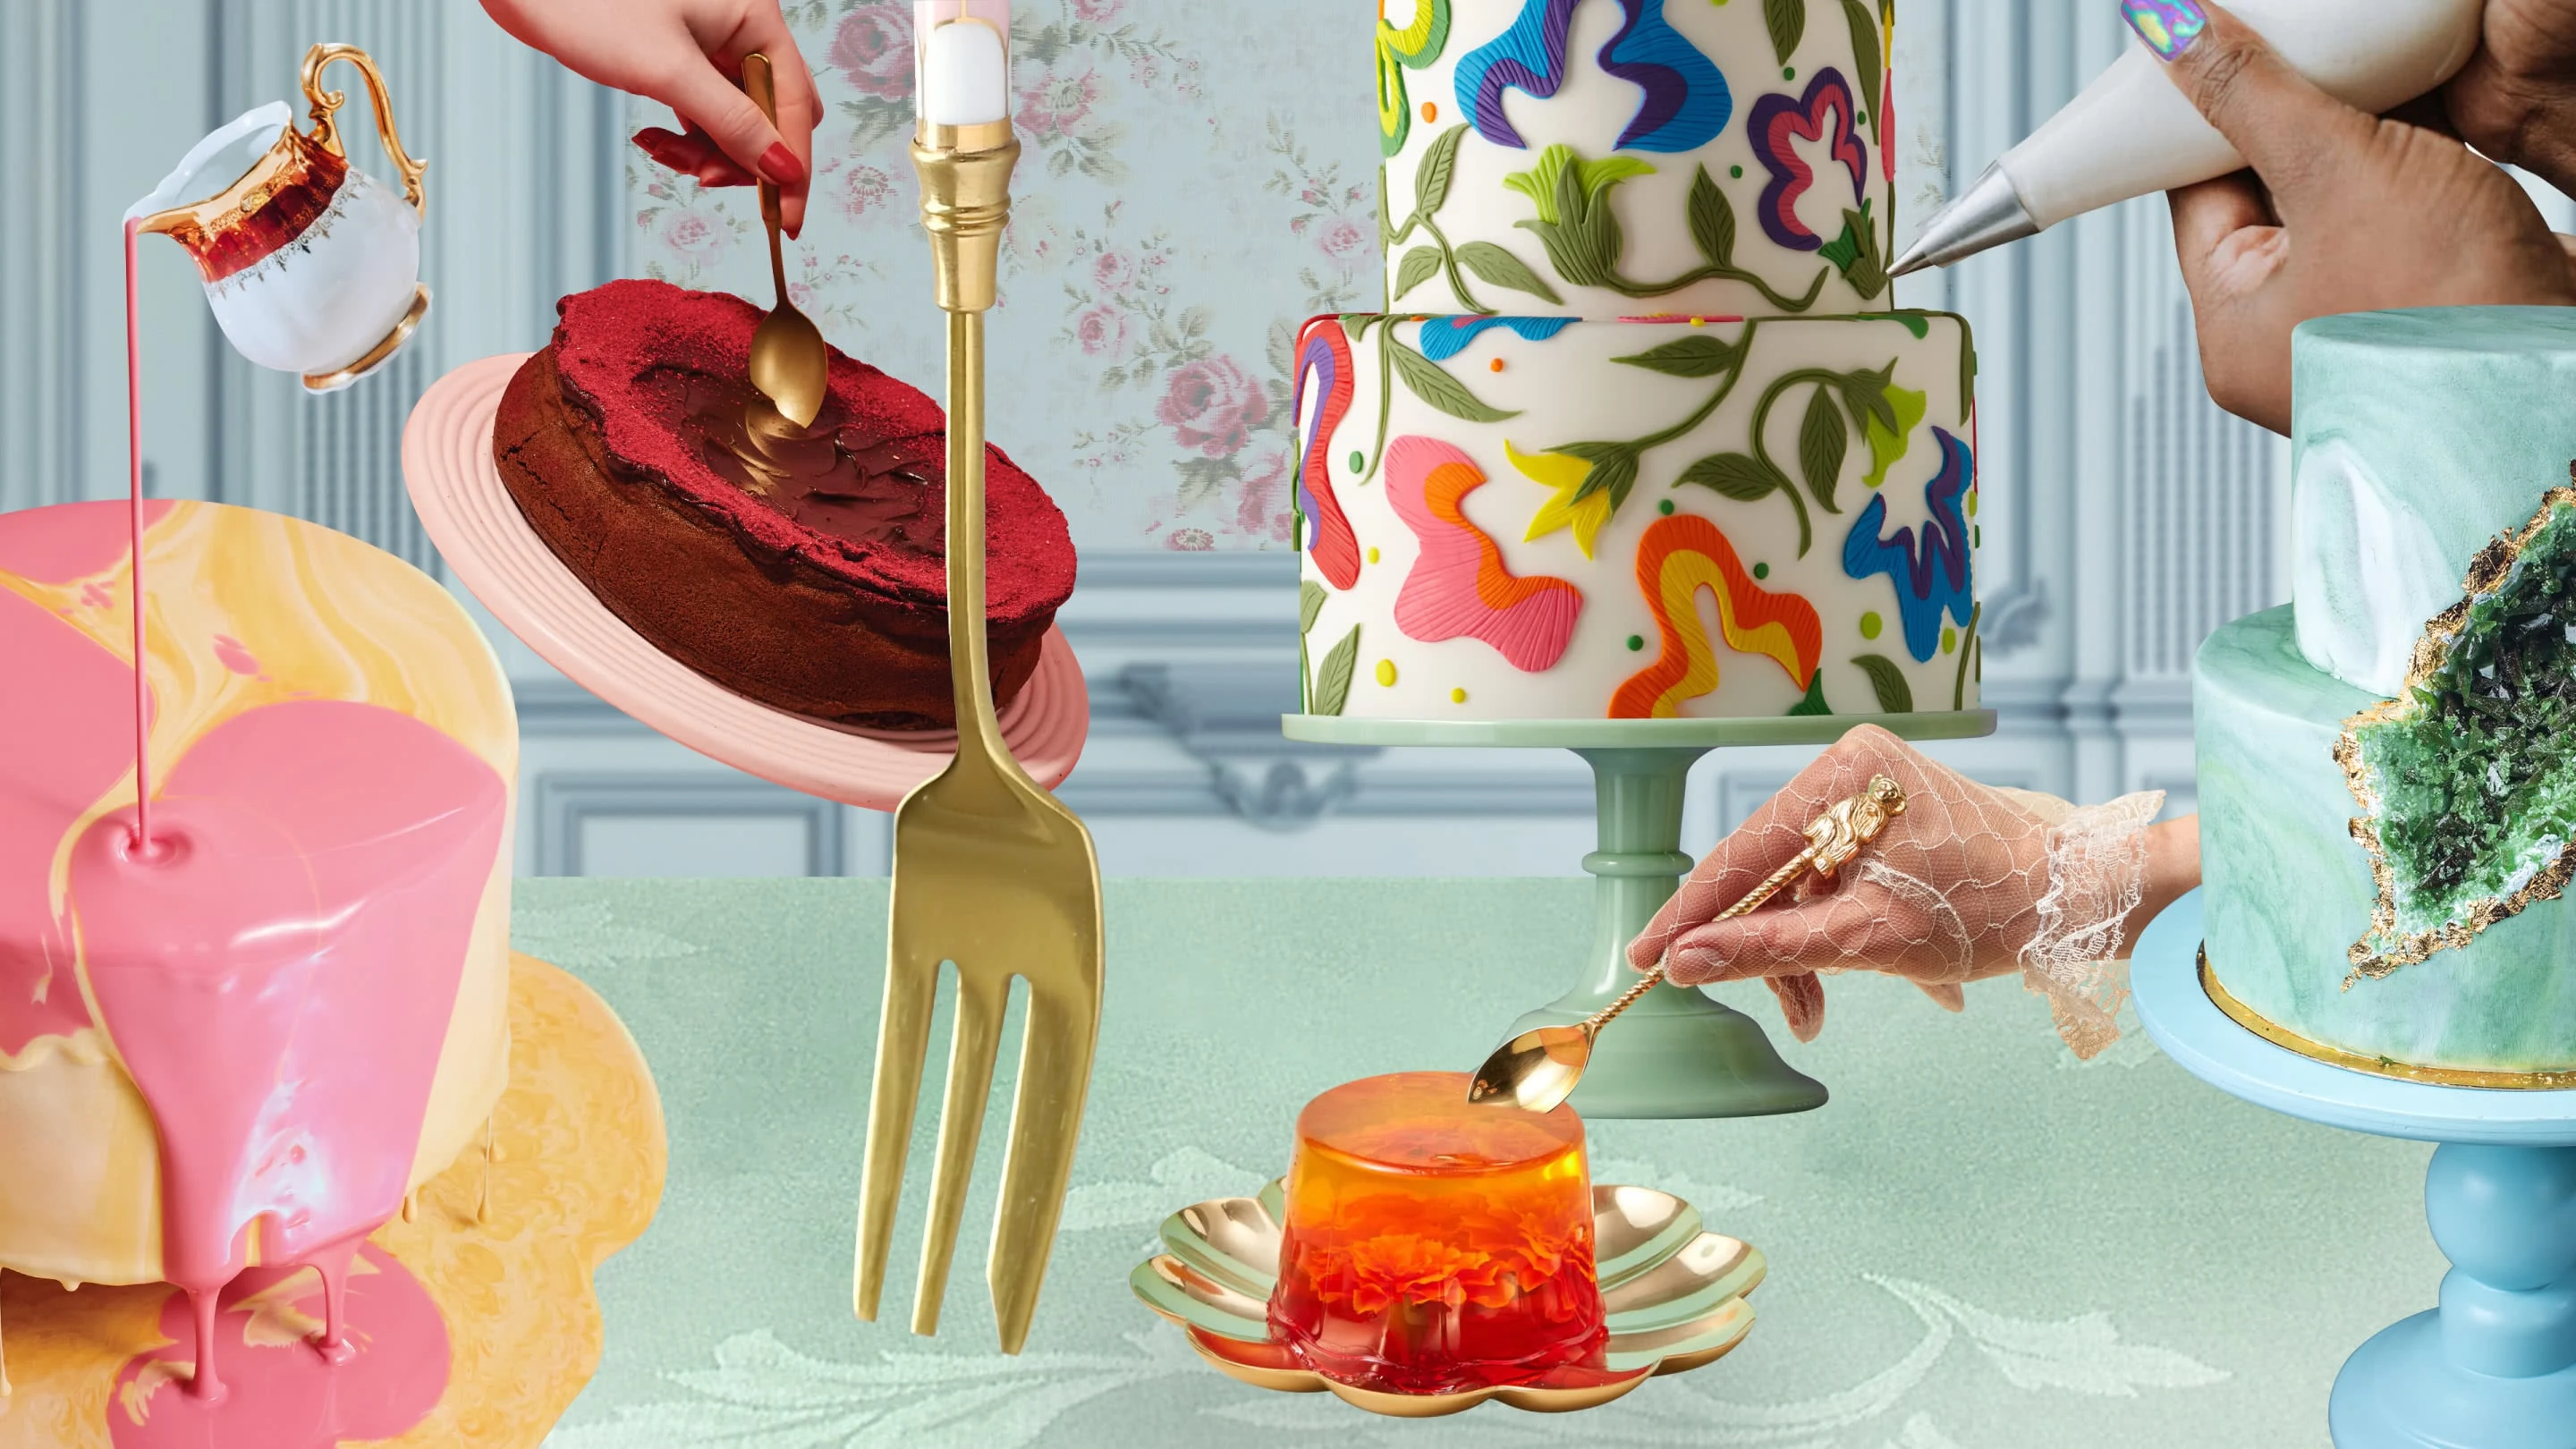 Collage of cakes. Yellow rounded cake with a teacup hovering on top spilling pink frosting over it. Red velvet cake with a chocolate center. Two-tier cake with flowers made out of fondant. Orange gelatin cake. Green geode cake. 